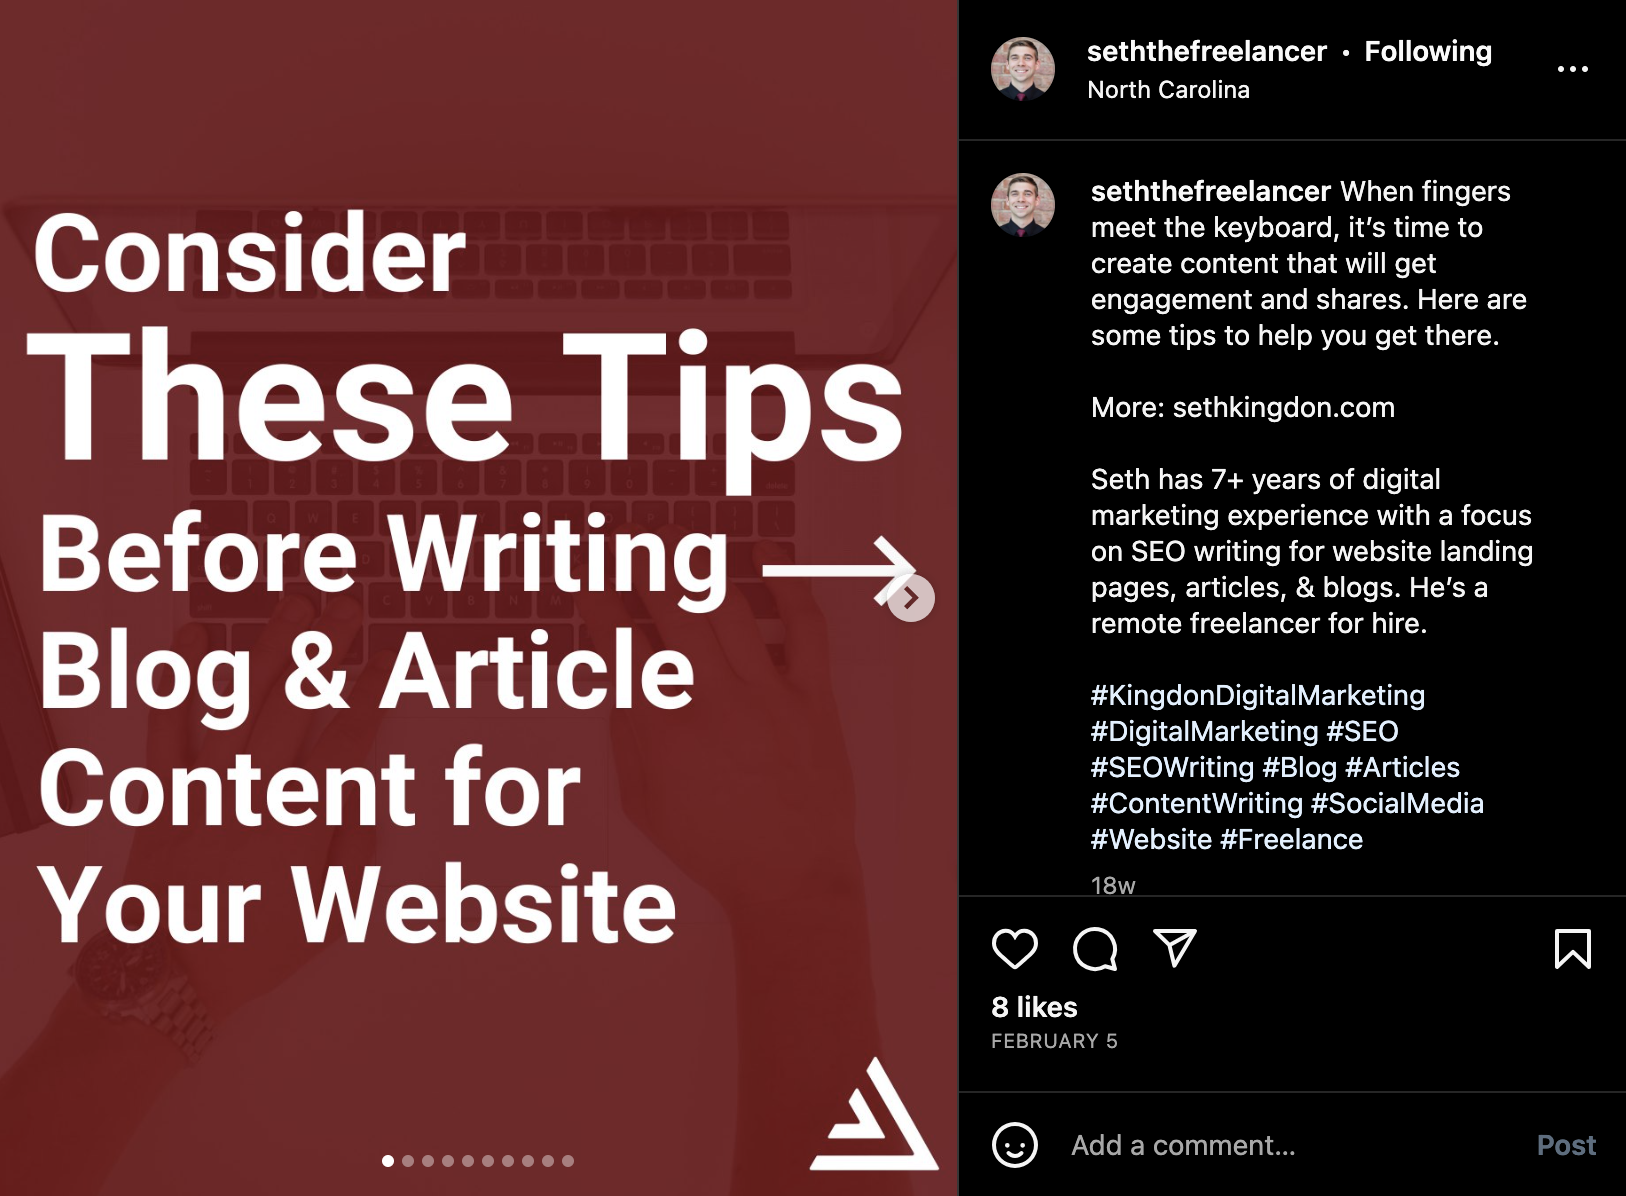 Instagram post telling you what to consider before starting a blog or writing an article